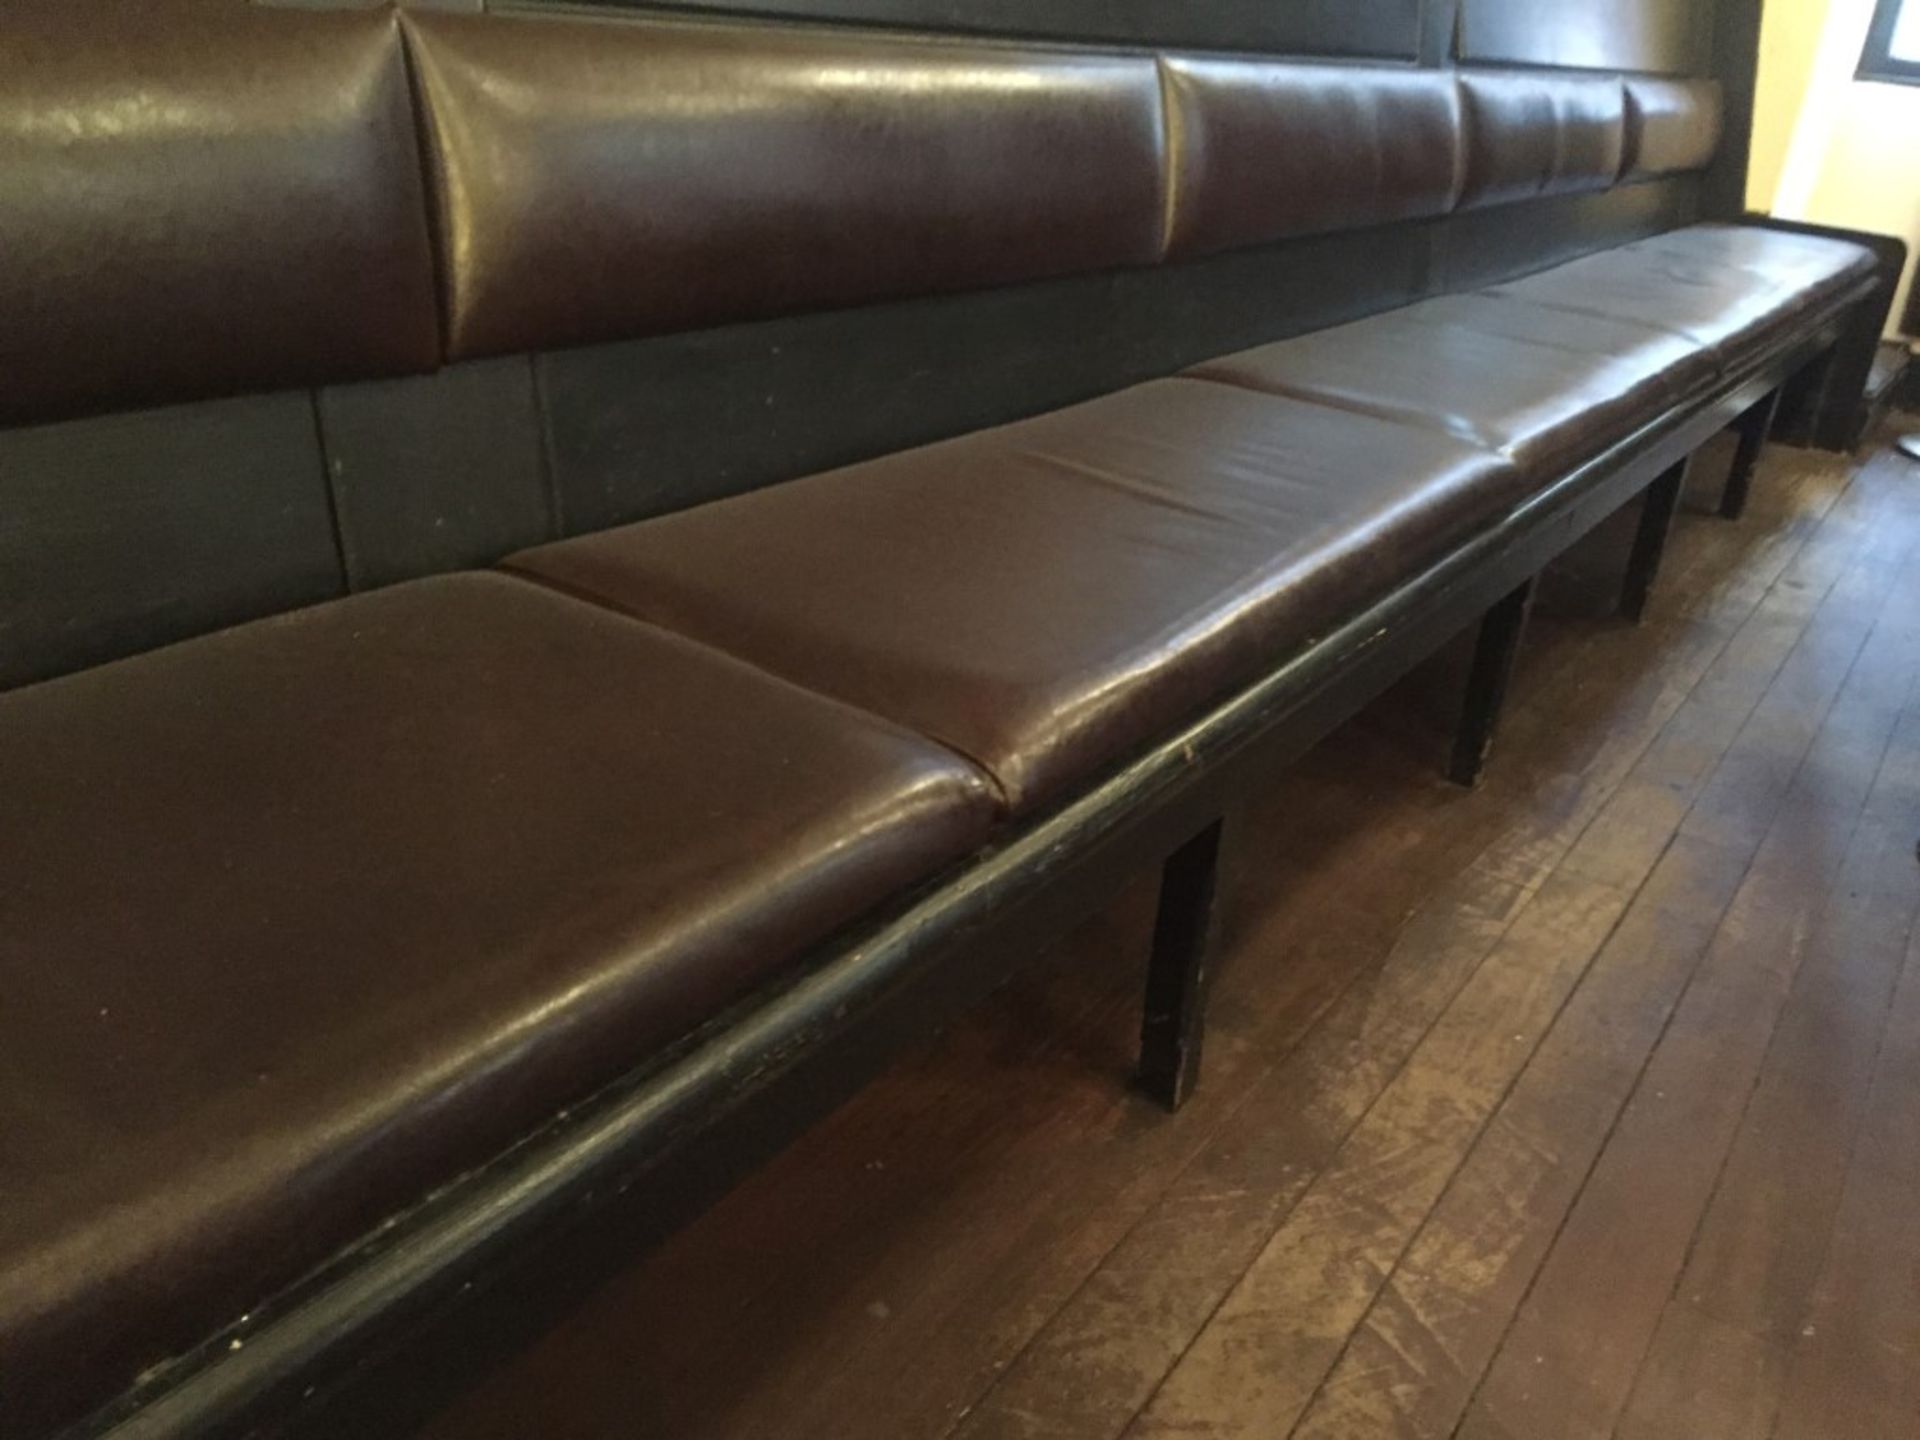 1 x Commercial Wall Seating In Excellent Condition - Offers Seating For Approx 16 Persons In - Image 4 of 4